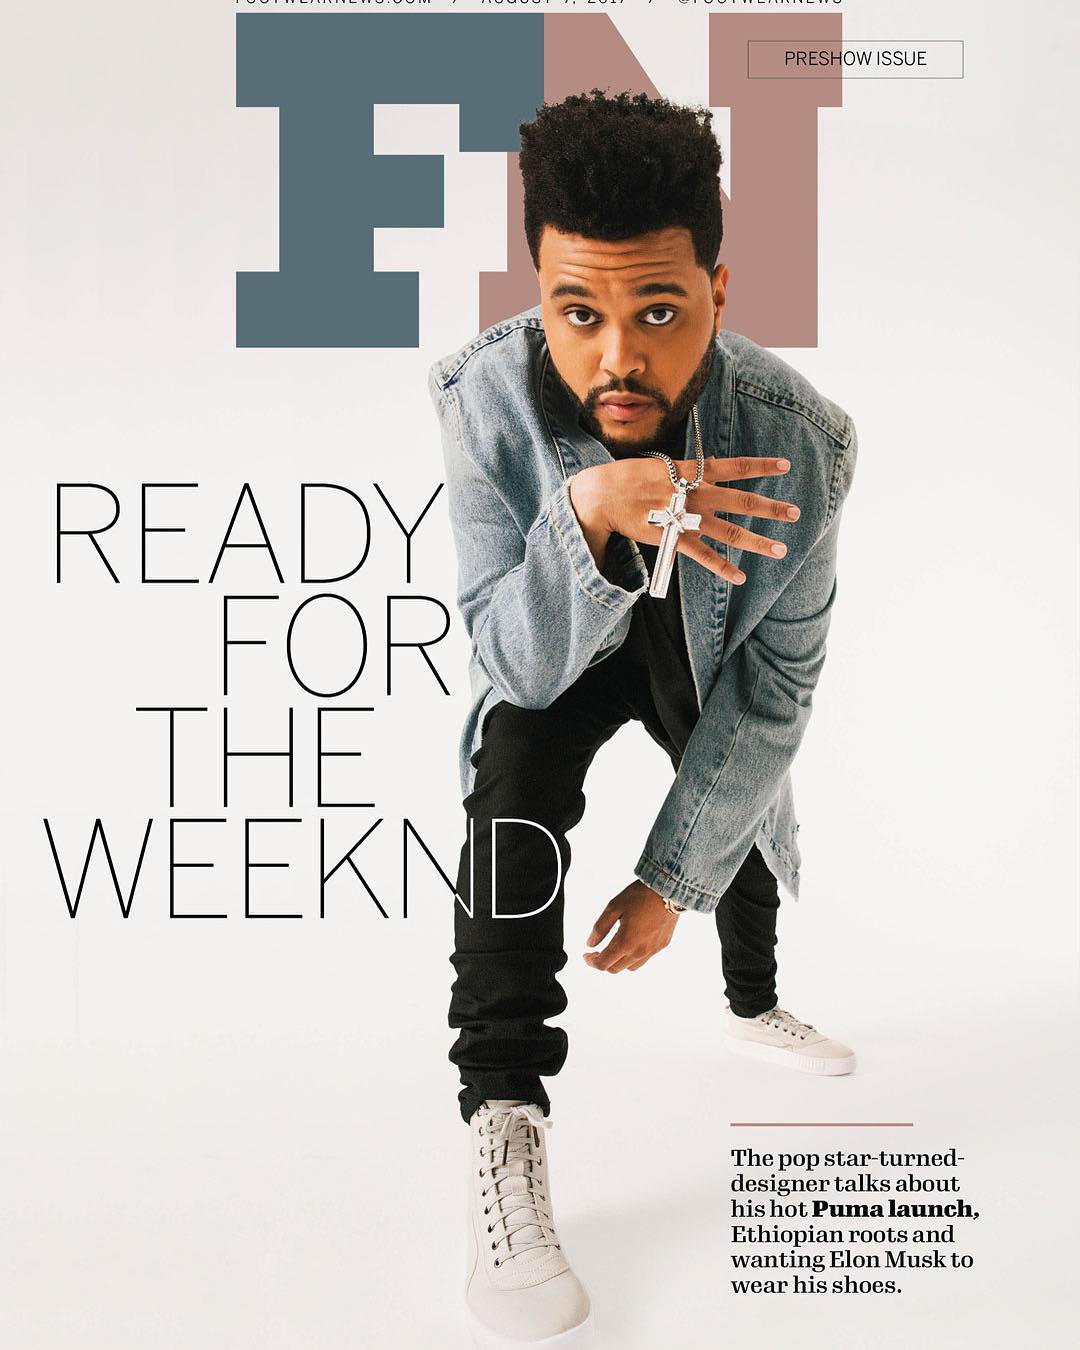 The Weeknd talks about his New Collection for Puma with Footwear News